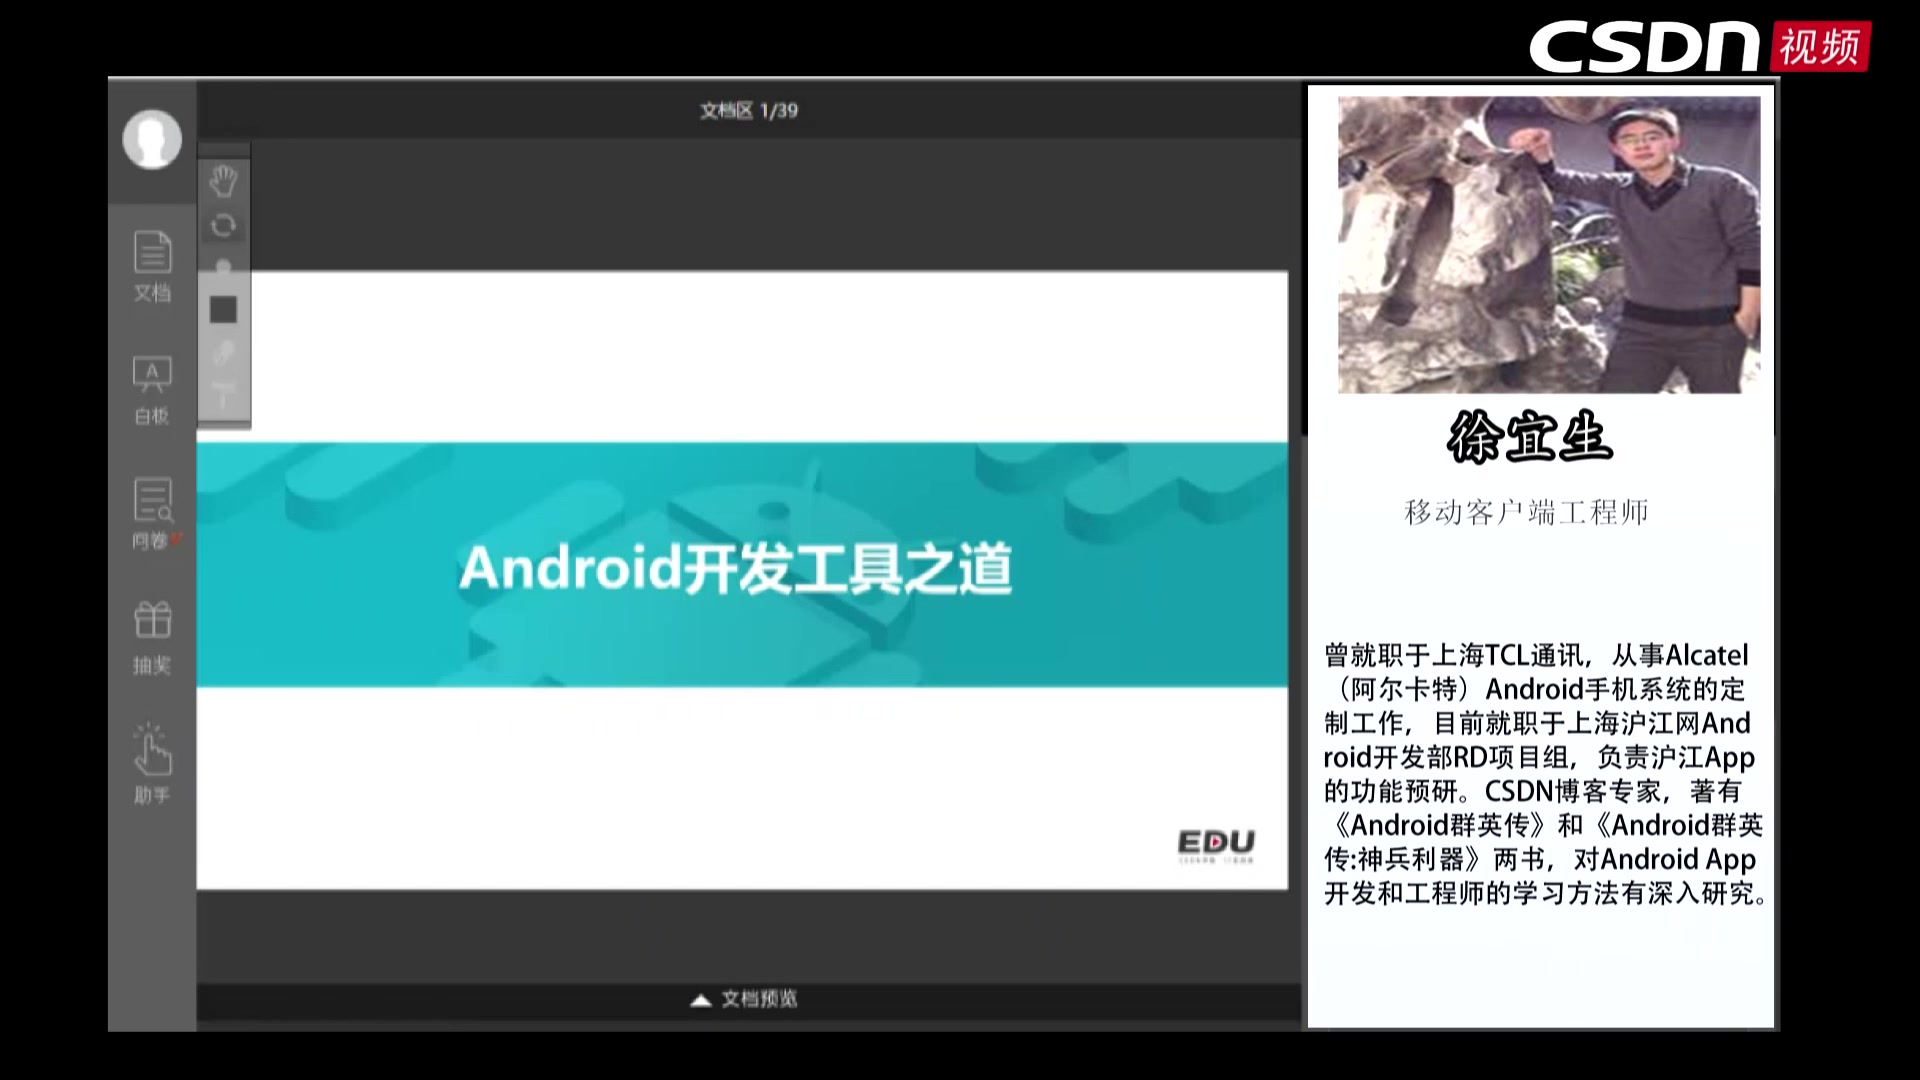 Android开发工具之道